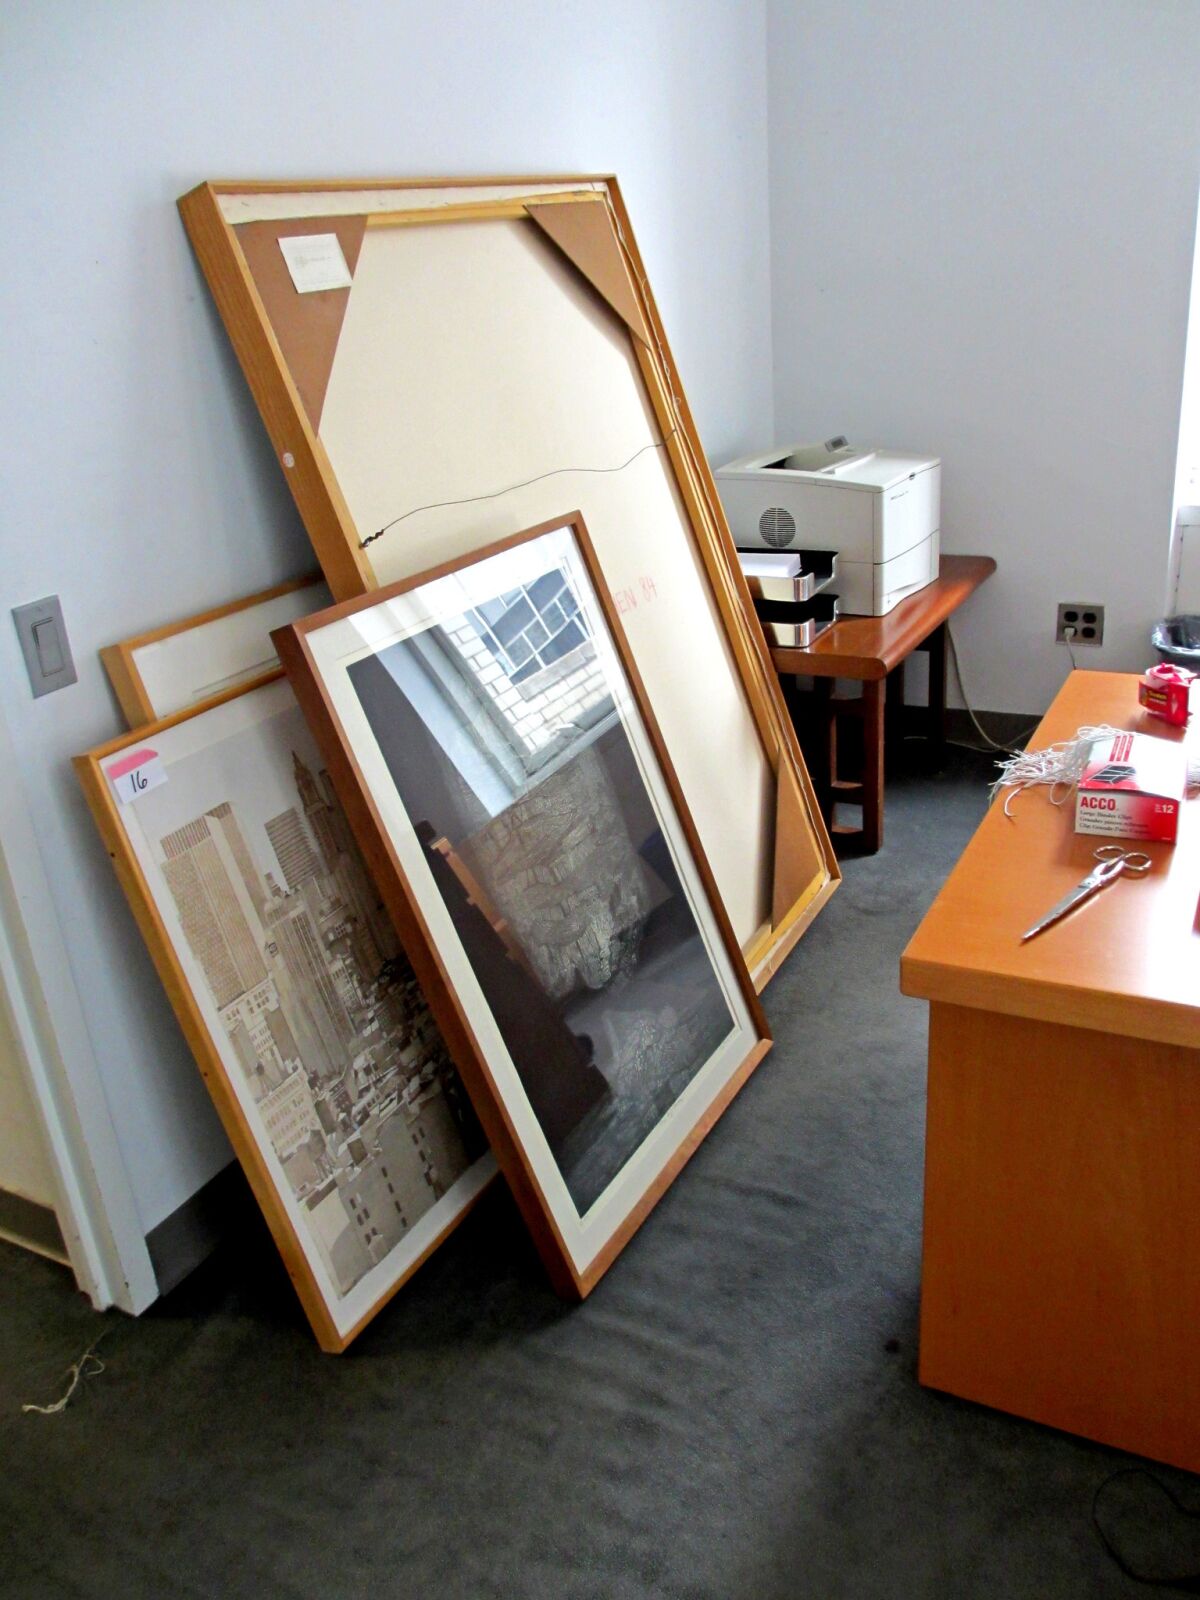 Artwork in The Times' New York bureau being prepared to be sent to an auction house as part of the office's closure in 2012.